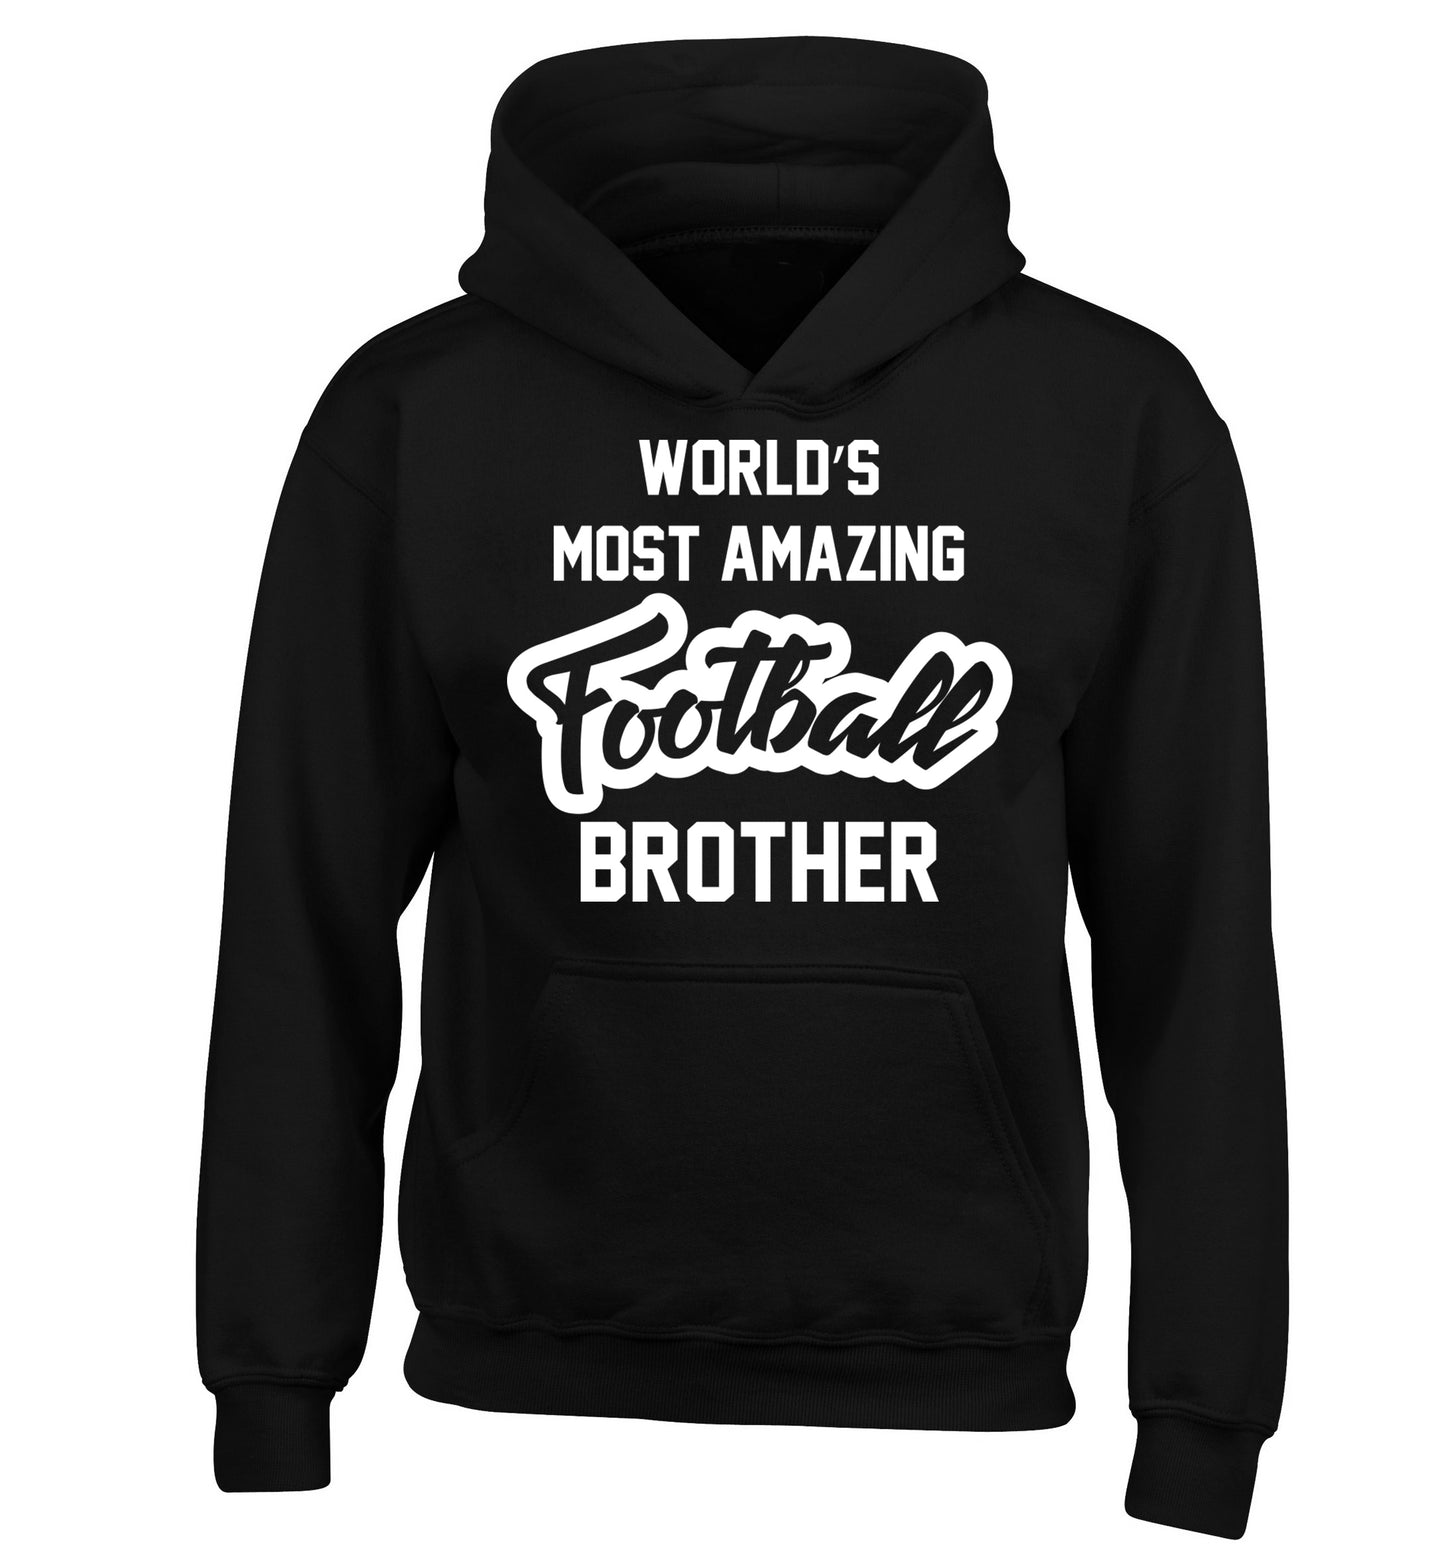 Worlds most amazing football brother children's black hoodie 12-14 Years